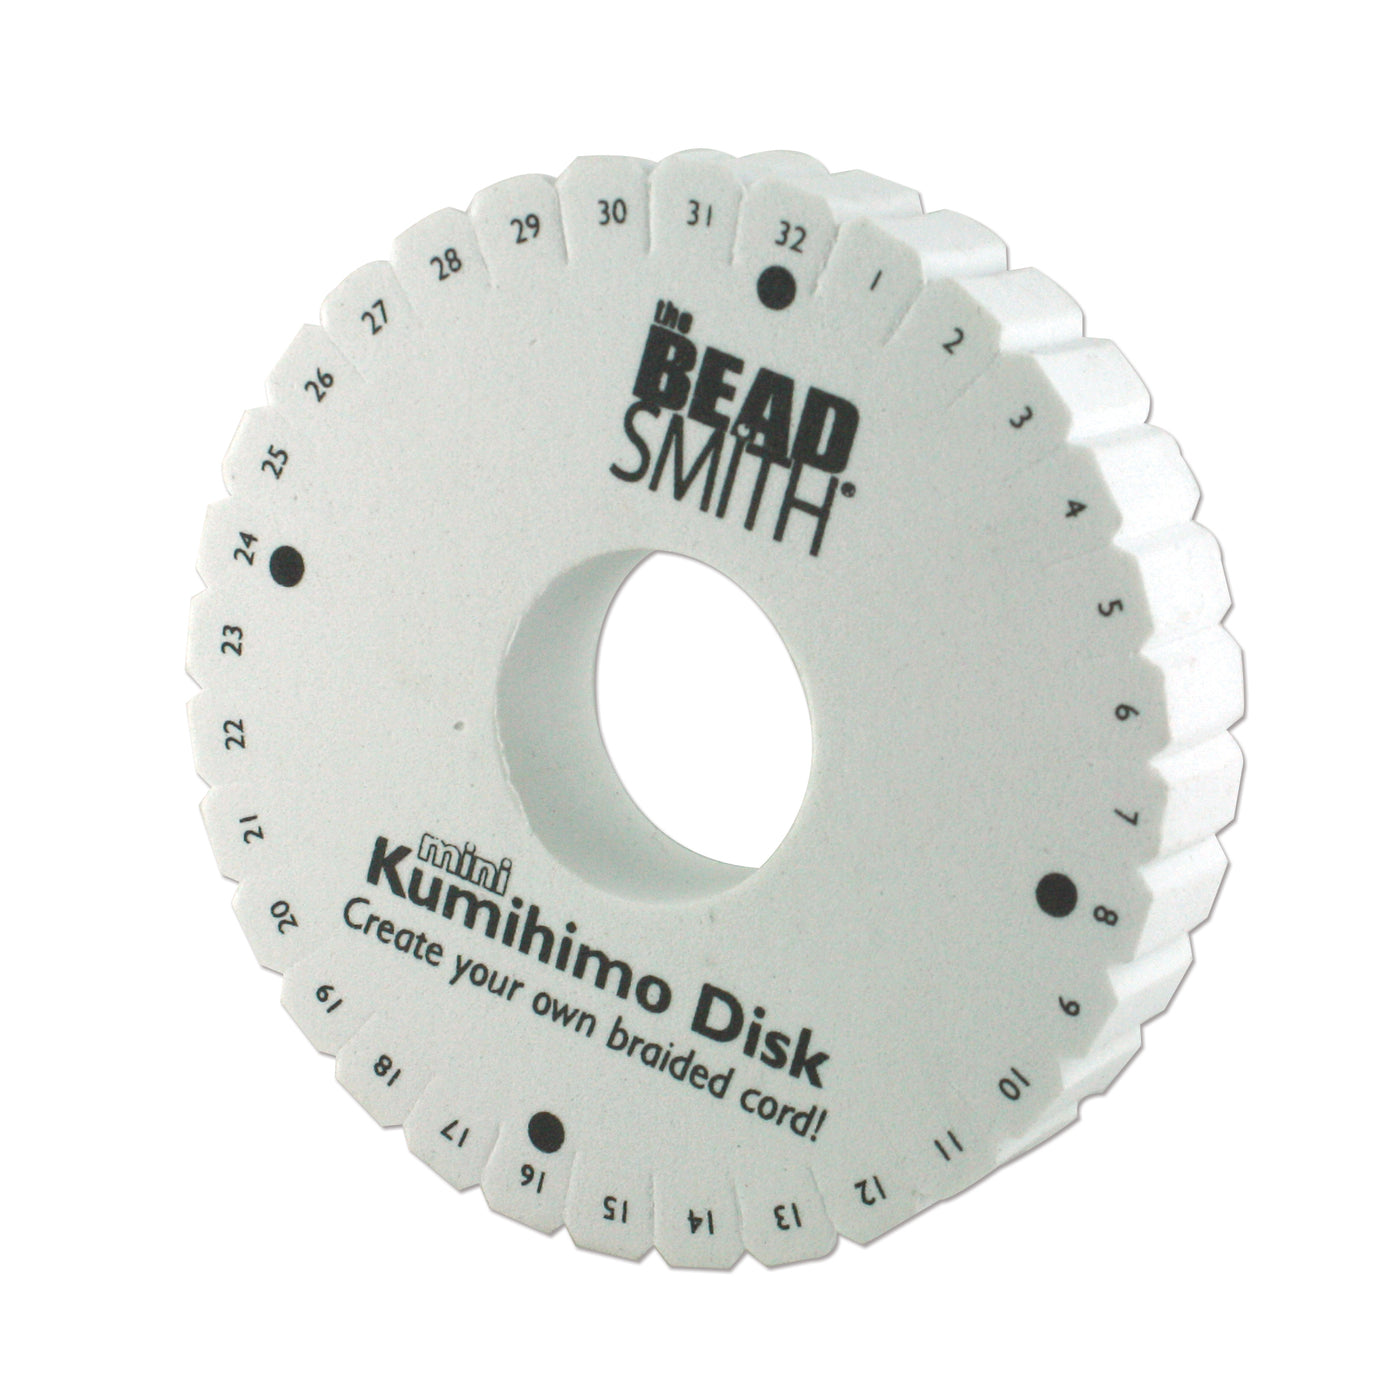 GET Two! Large 6 Double Density Kumihimo Disk. Extra Thick, Use on Fine  Threads or When Using Beads.